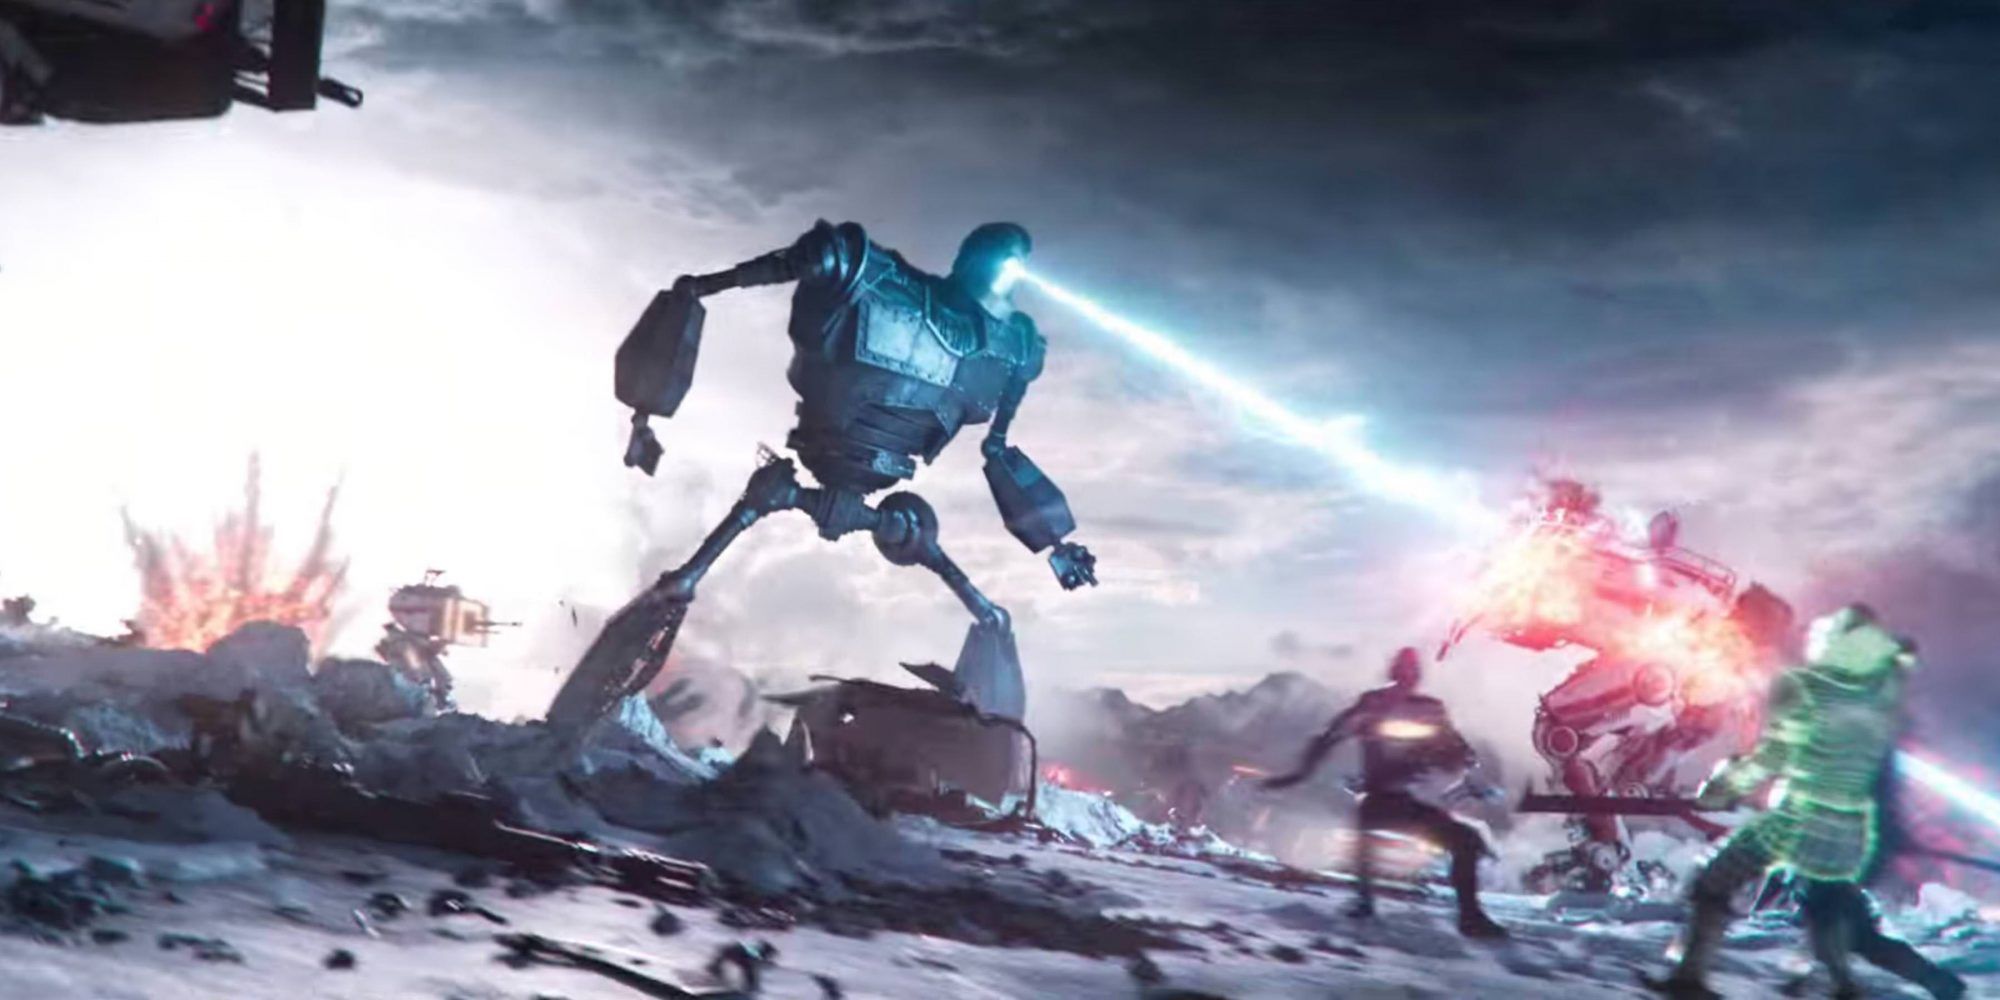 The Iron Giant shooting a walker in the final battle of Ready Player One